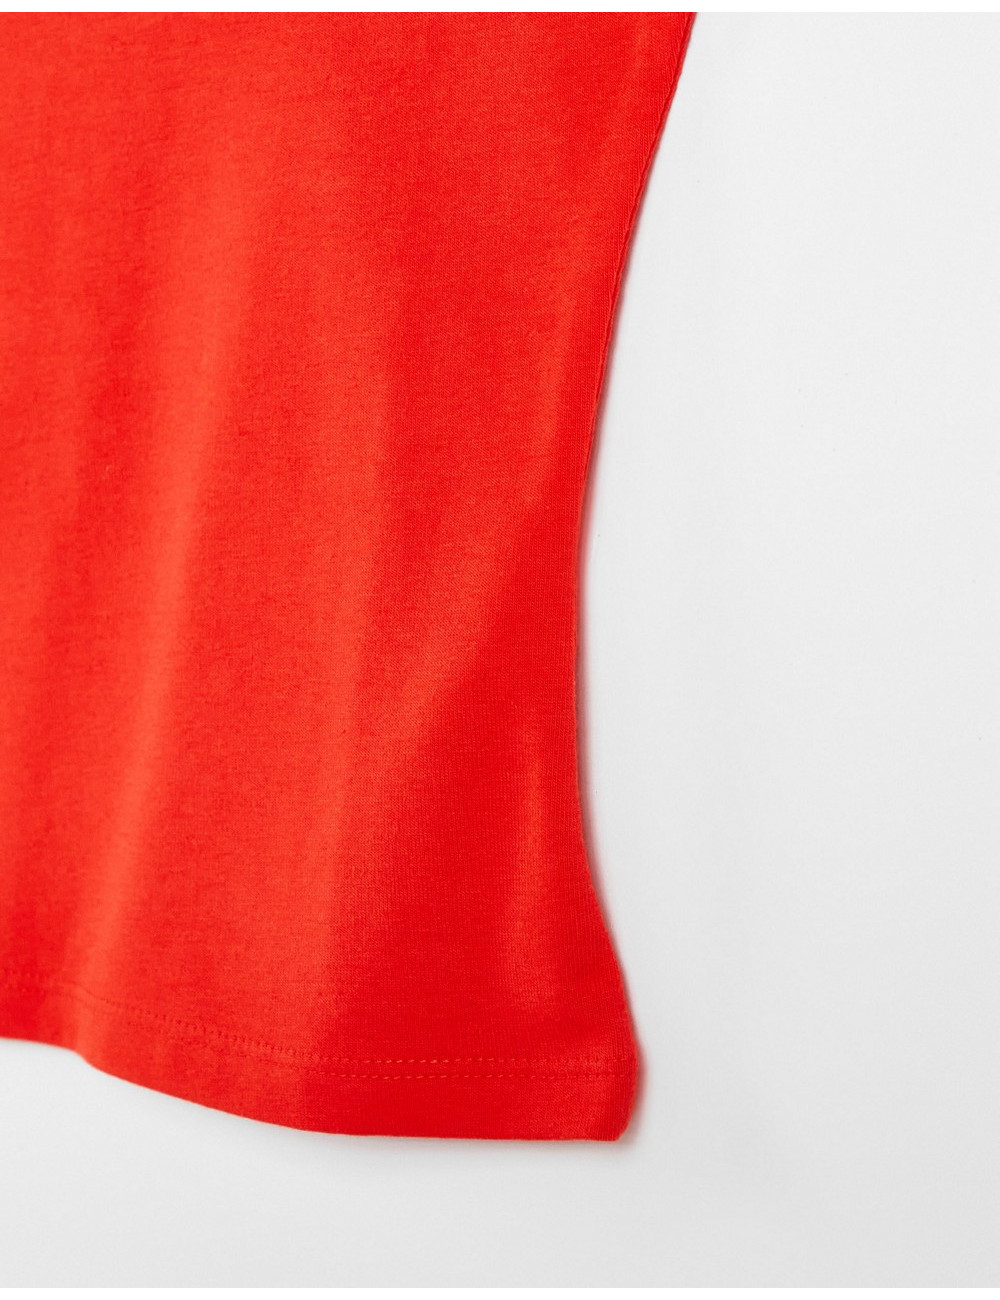 ASYOU vest top co-ord in red